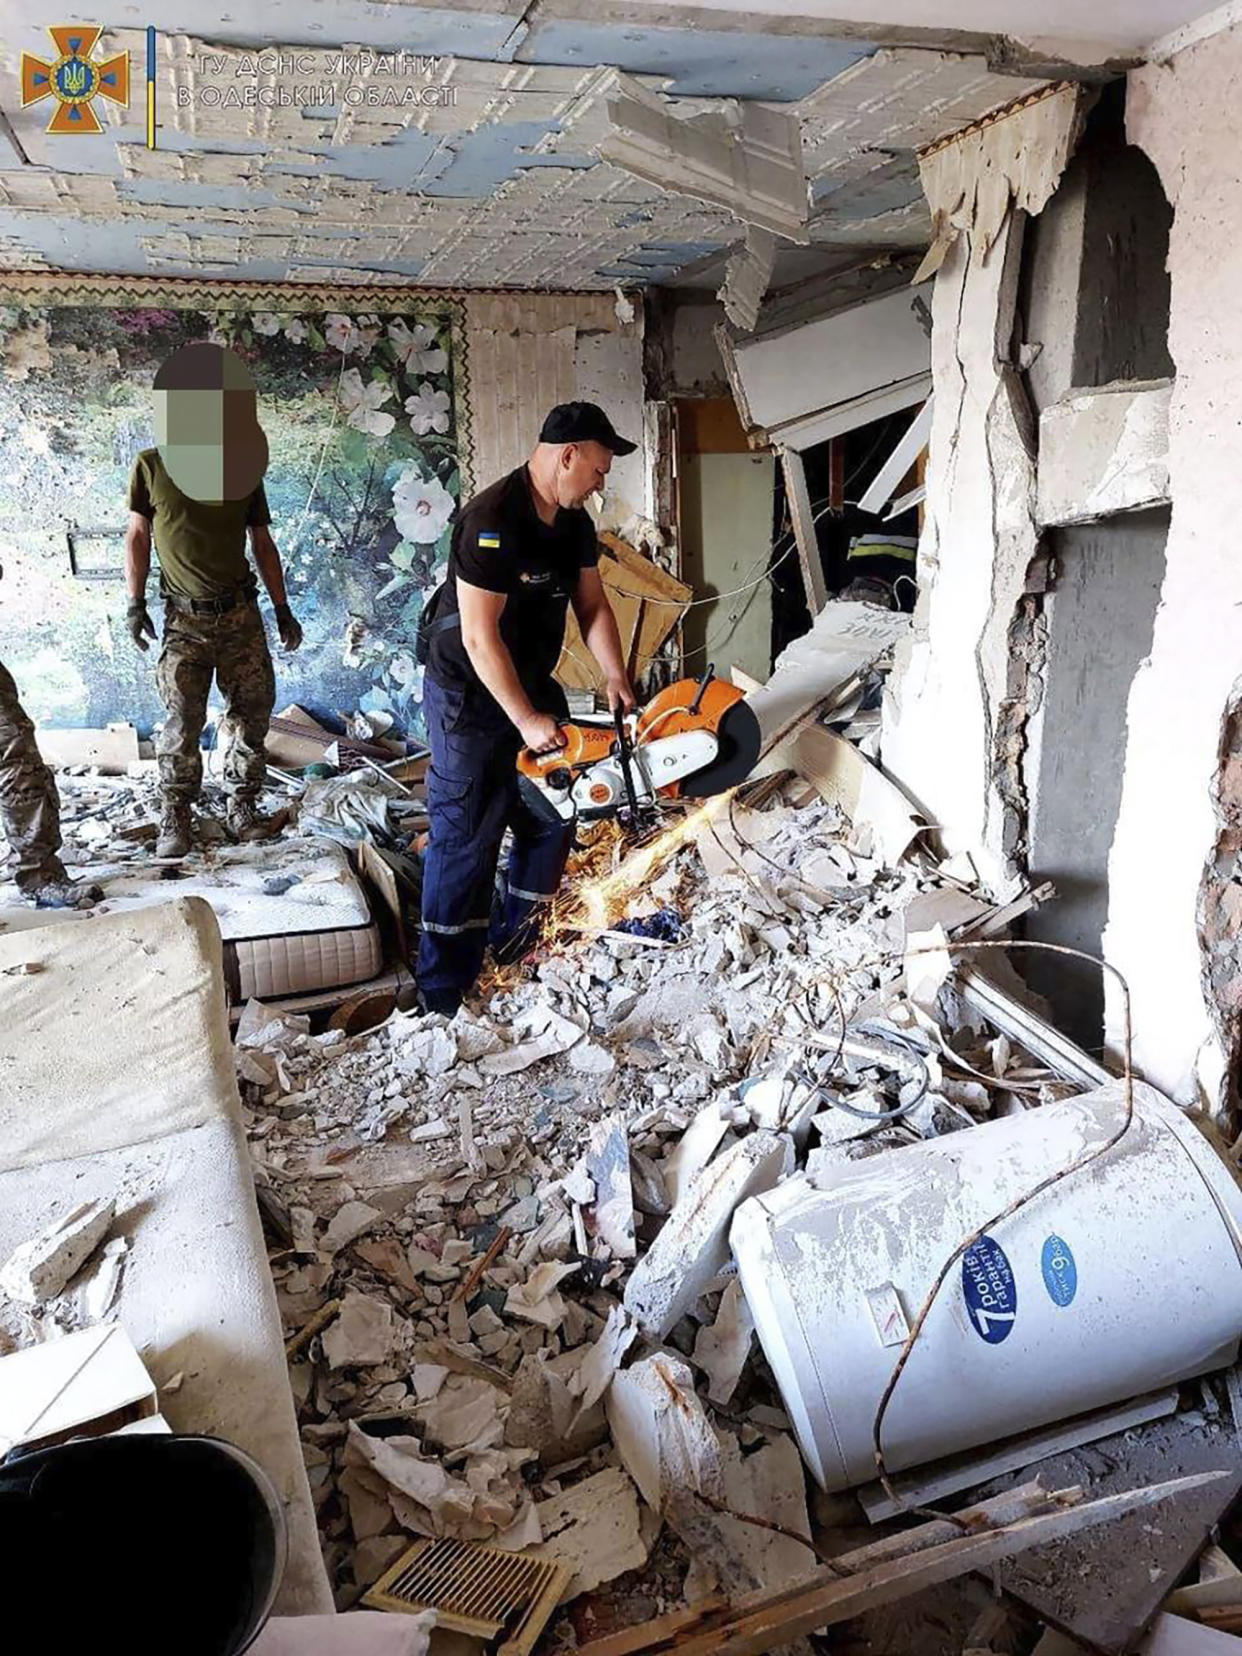 In this photo provided by the Ukrainian Emergency Service, first responders work on a damaged residential building in Odesa, Ukraine, early Friday, July 1, 2022, following Russian missile attacks. Ukrainian authorities said Russian missile attacks on residential buildings in the port city of Odesa have killed more than a dozen people. (Ukrainian Emergency Service via AP)